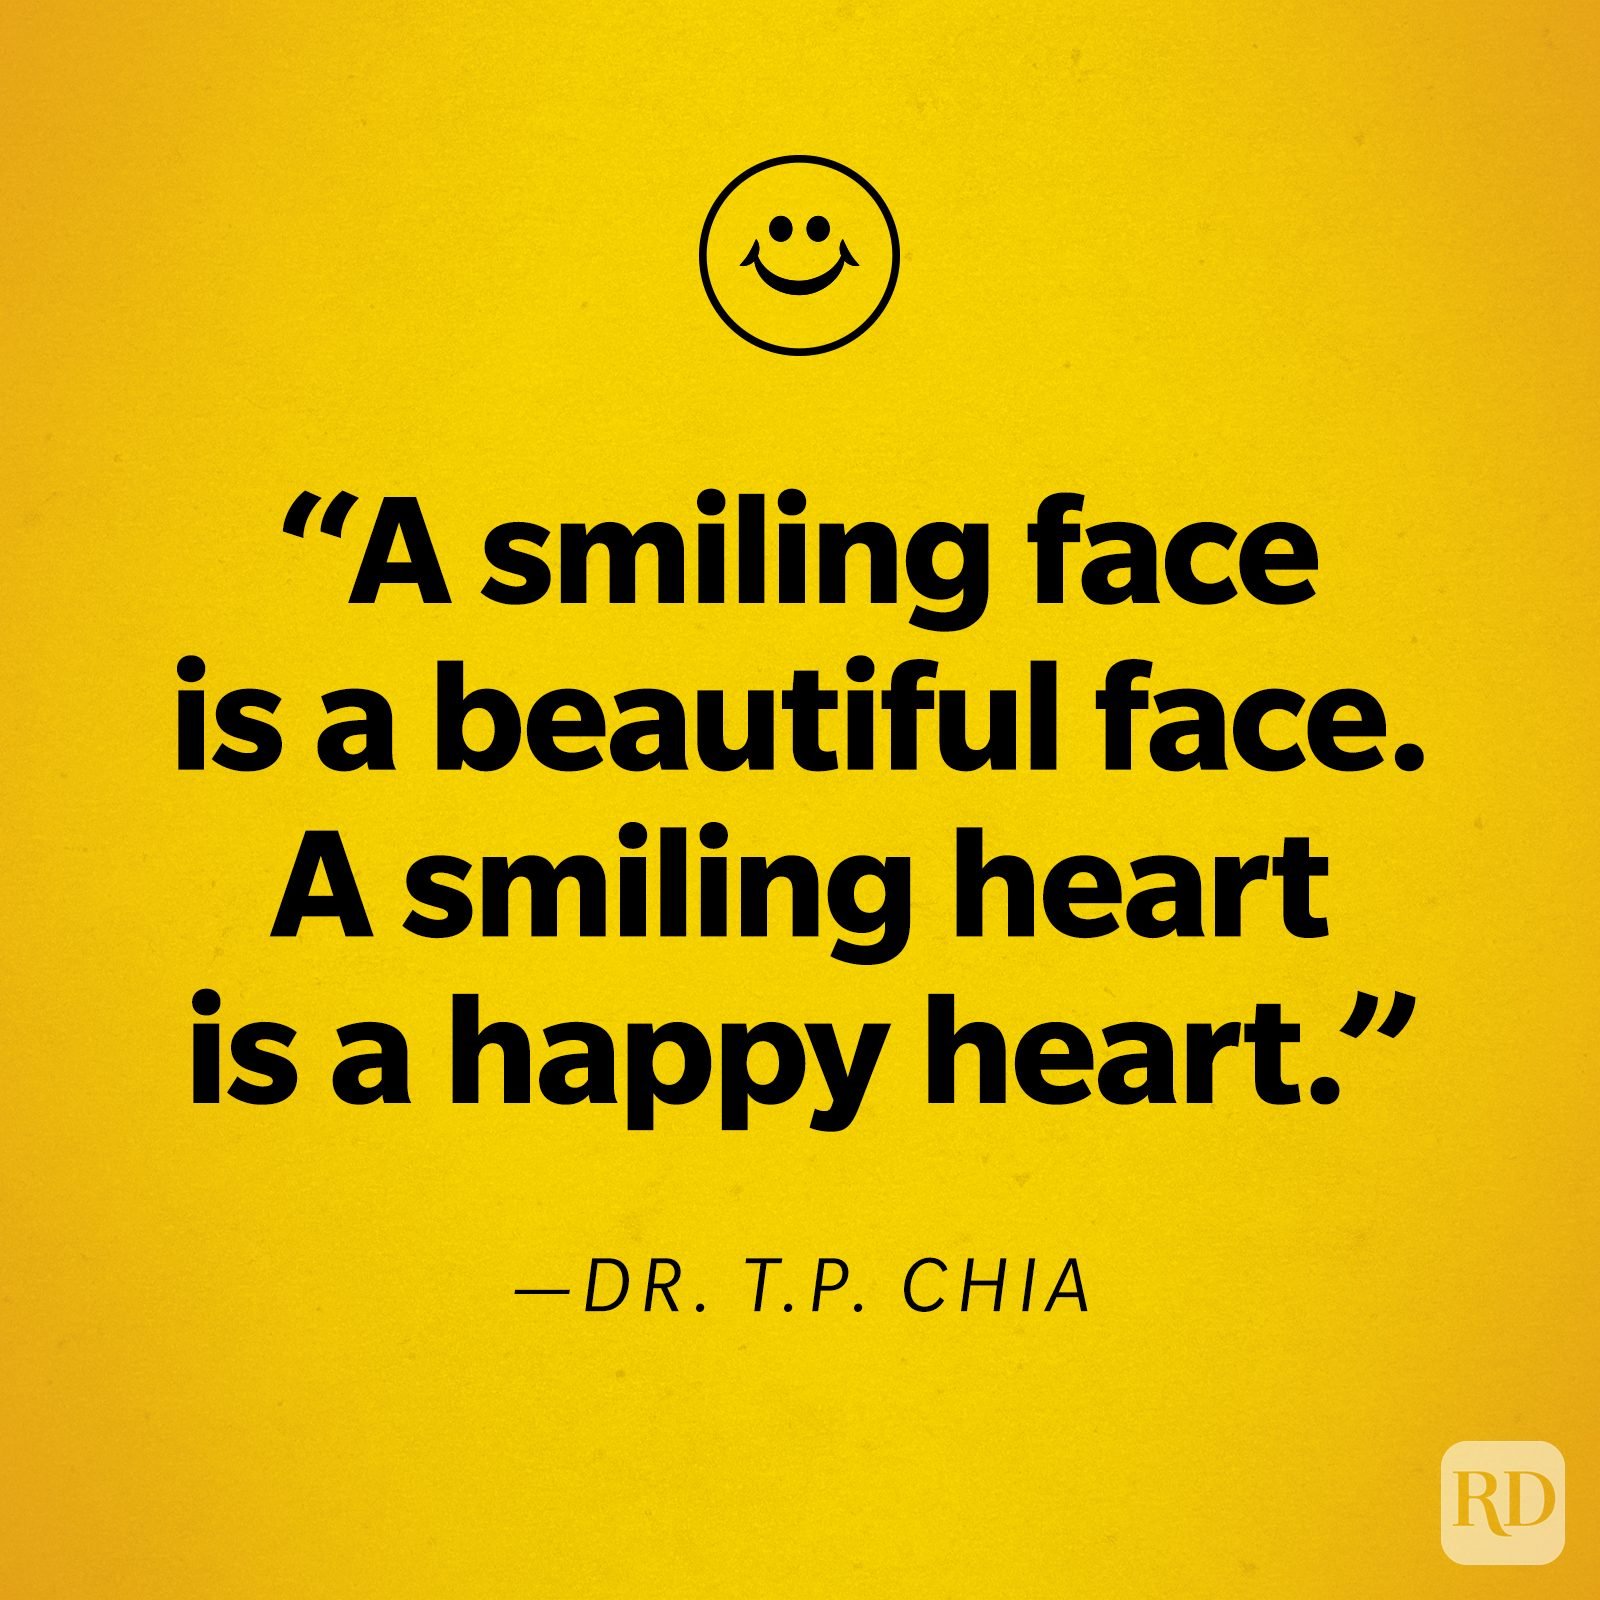 Dr. T.P. Chia Smile Quote "A smiling face is a beautiful face. A smiling heart is a happy heart."